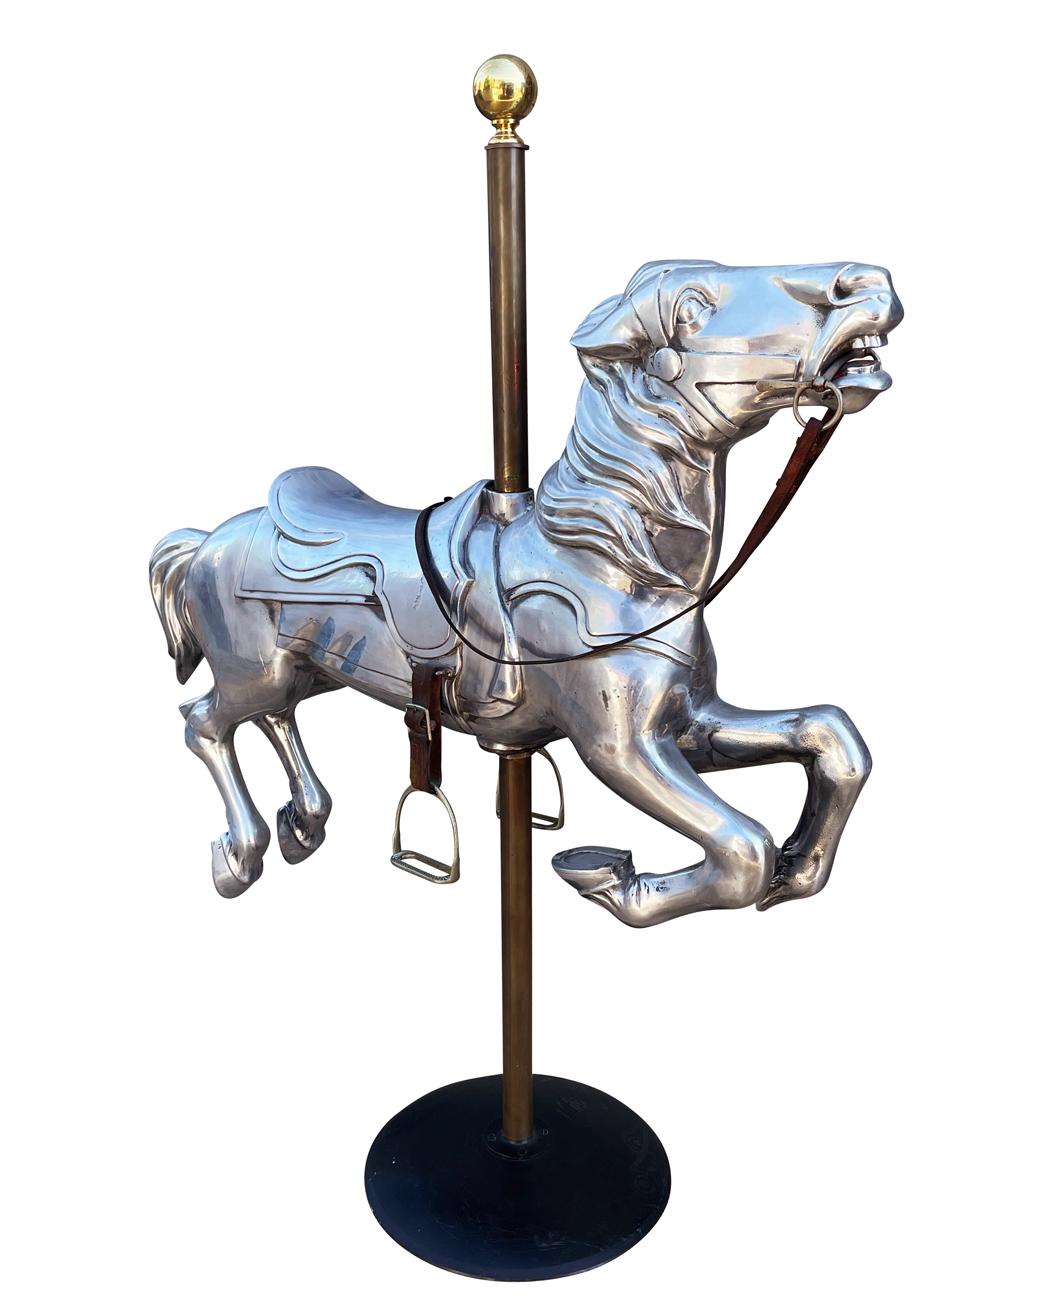 A mid century streamline design carousel horse in cast aluminum. The original paint was removed 40+ years ago and its been used as a sculptural piece of art.. Last owners claim it came from the Worlds Fair.